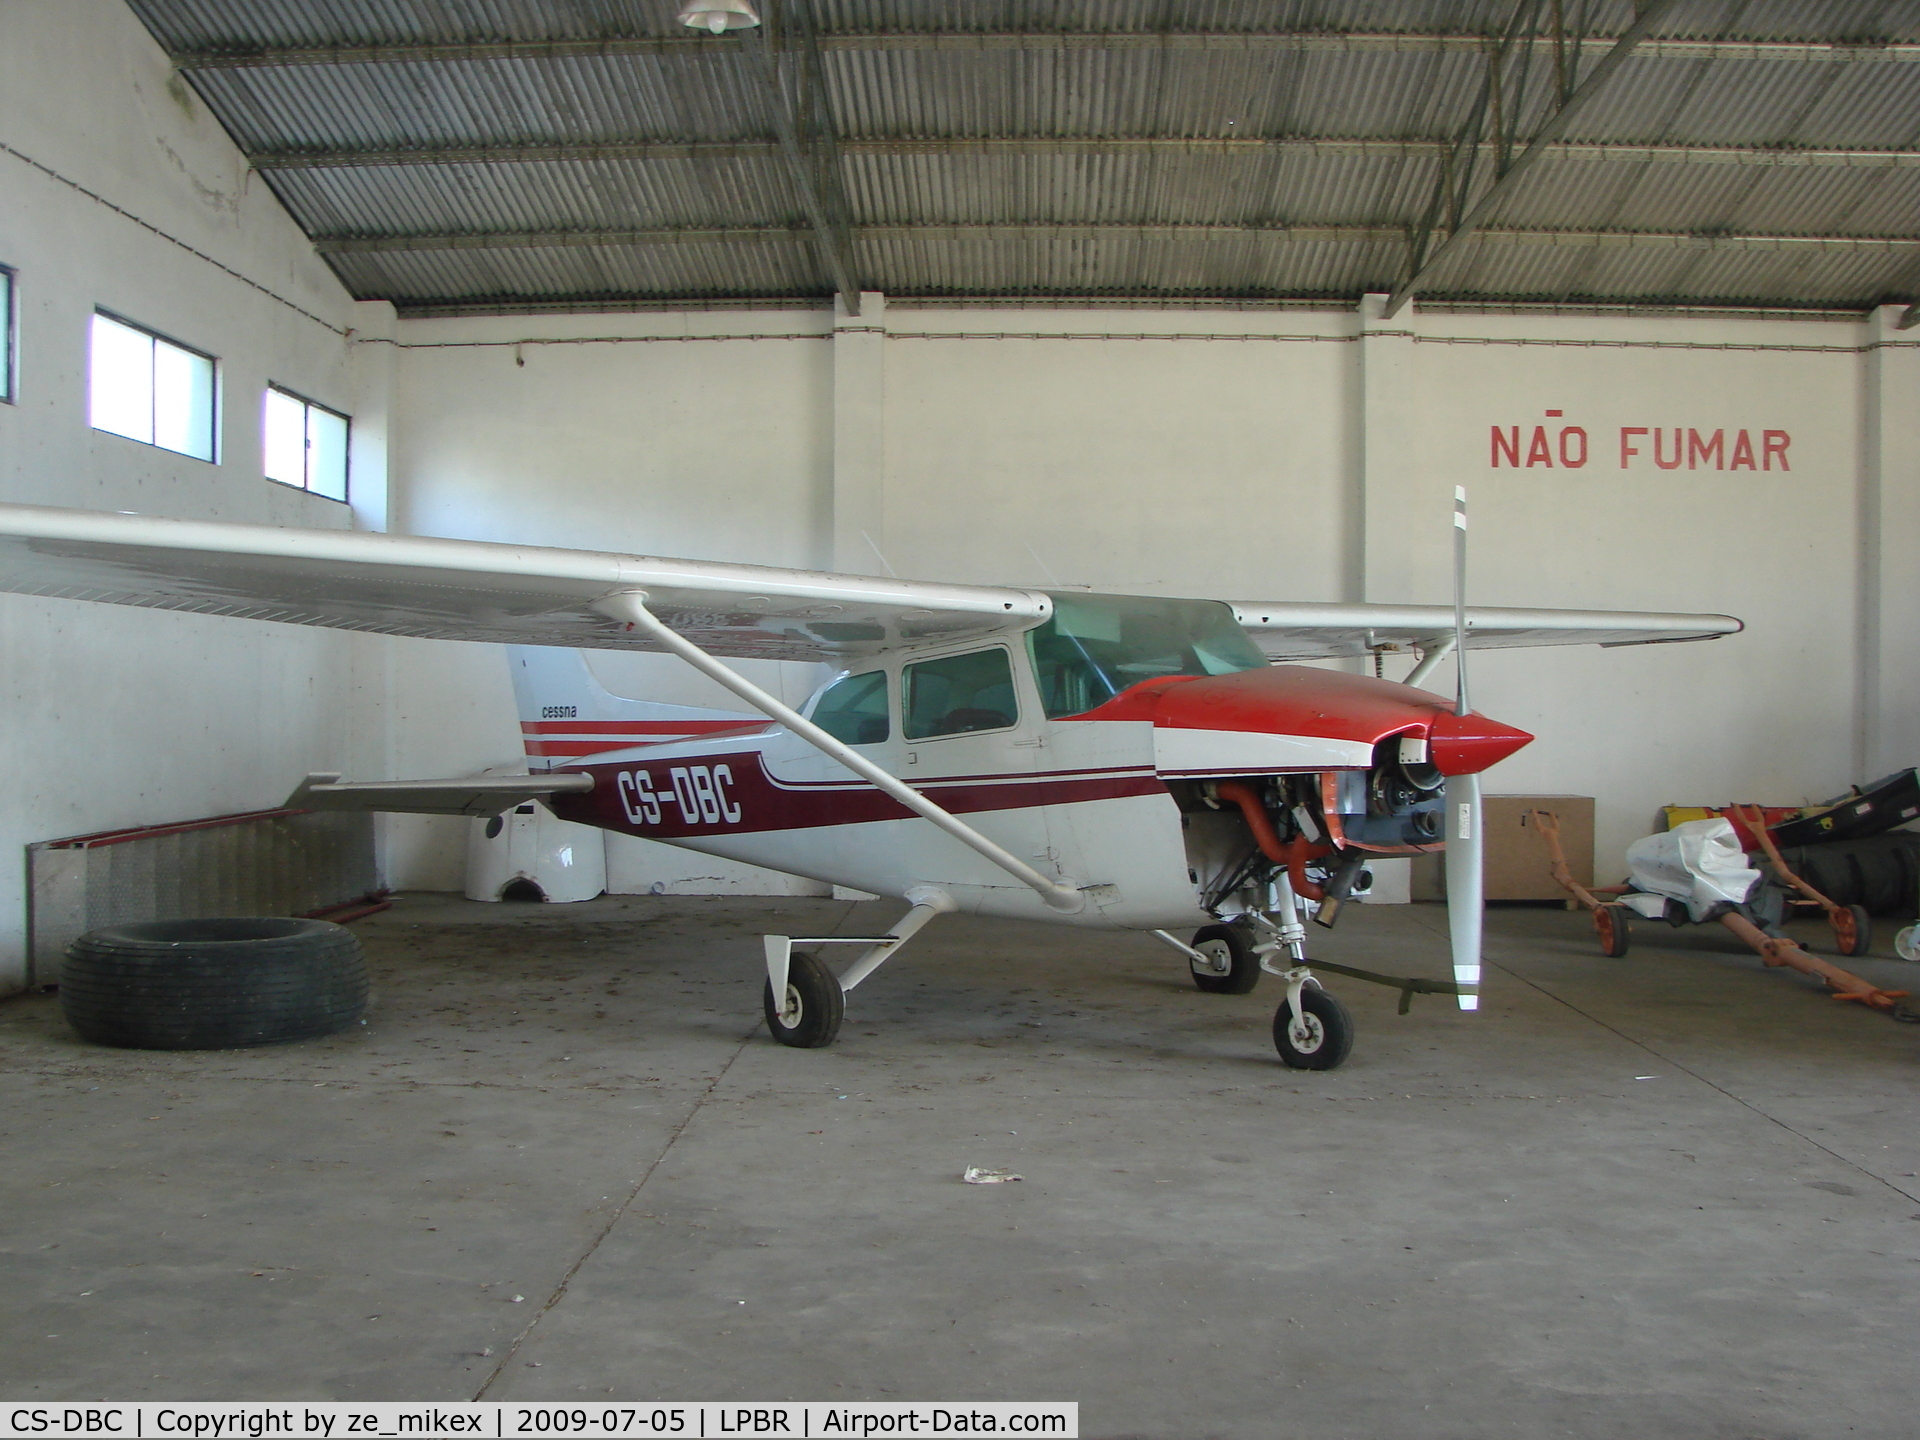 CS-DBC, 1978 Cessna 172N C/N 172-71143, Cessna 172N Skyhawk  based at Braga , i dont know any inf. about this plane